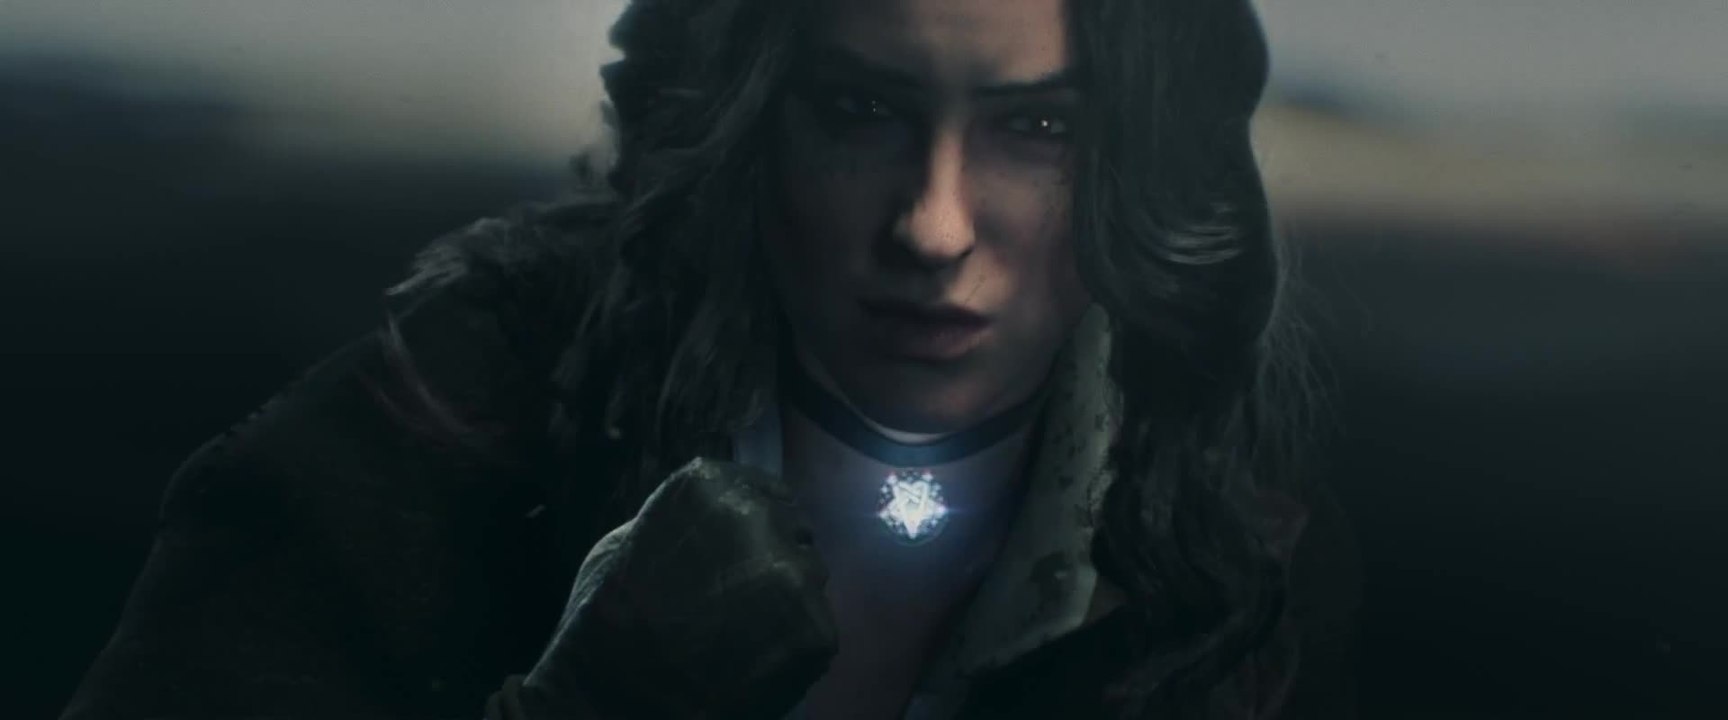 The Witcher 3: The Wild Hunt - Opening Cinematic Trailer (The Trail) [DE]